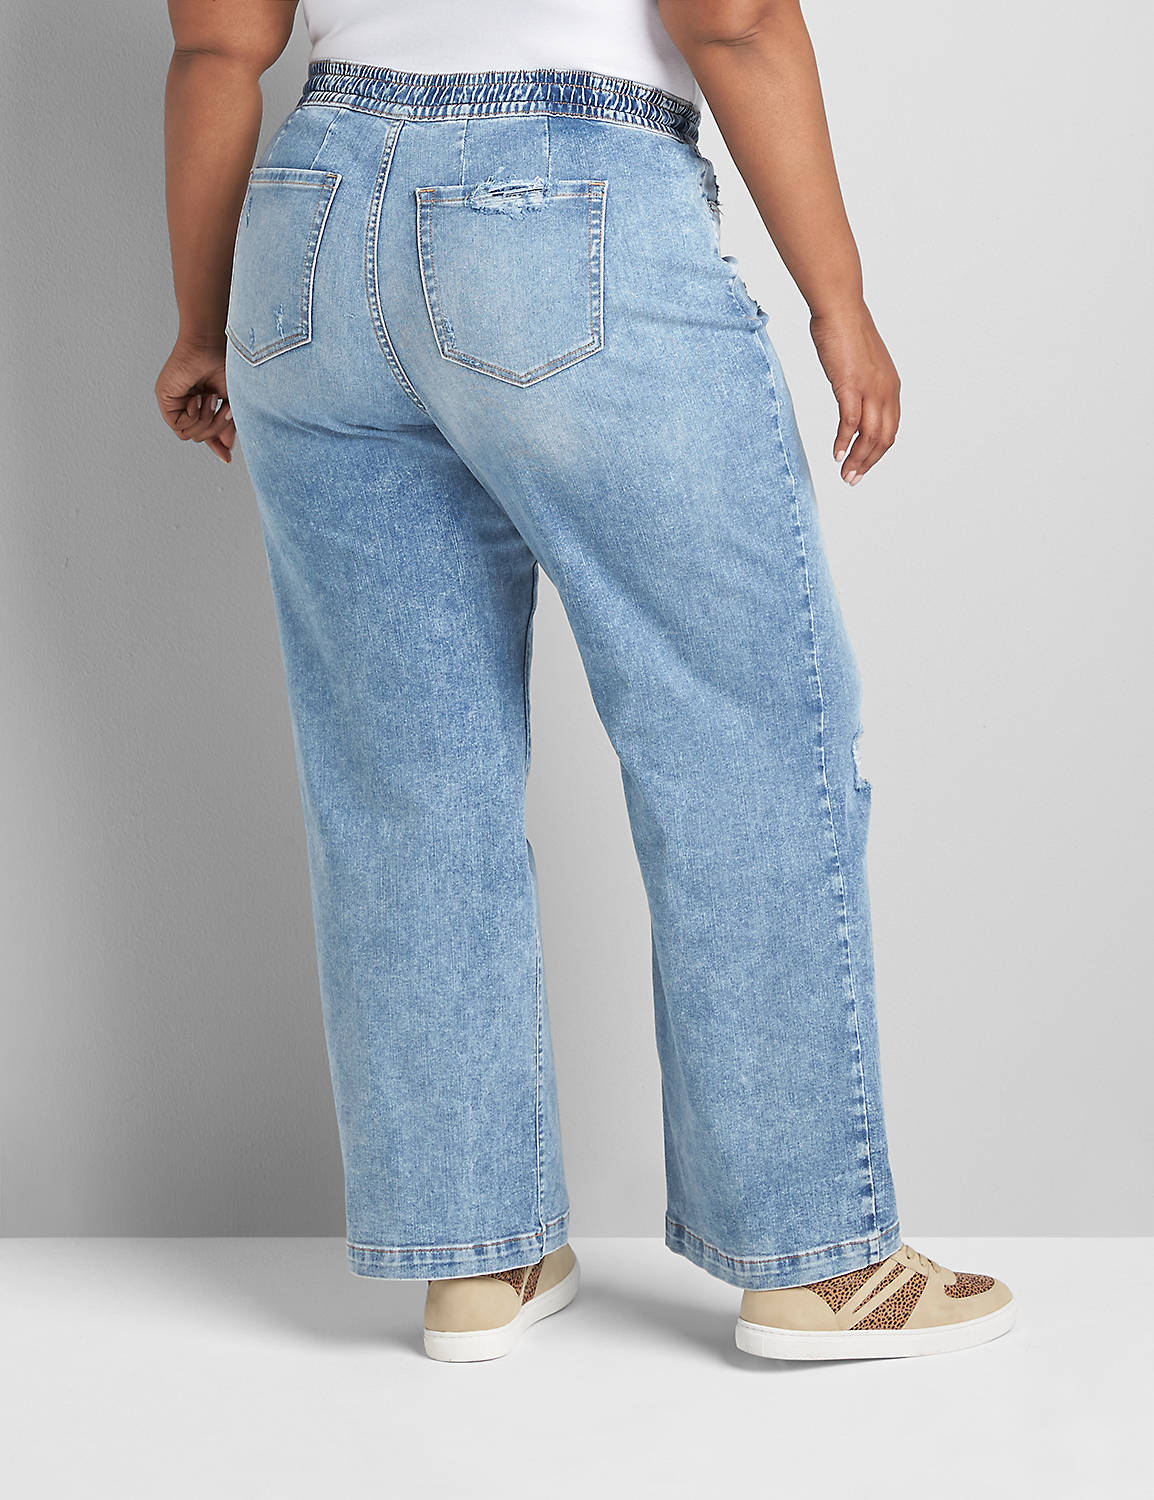 Pull-On Wide Leg Jean Product Image 2